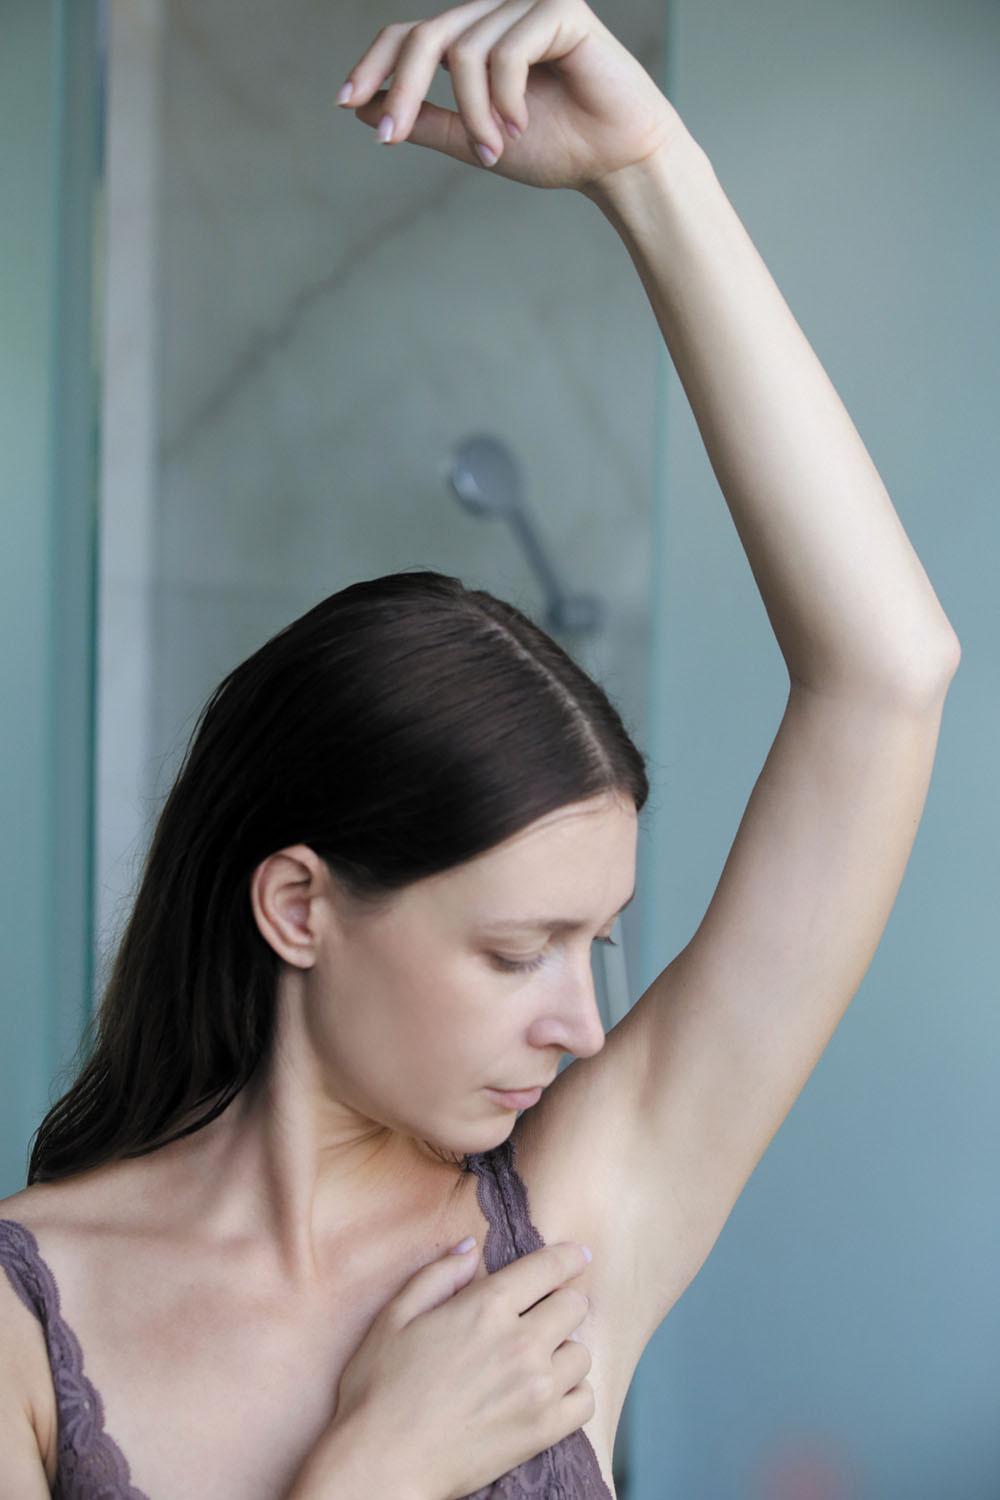 photo of a woman holding up her arm and smelling her armpit